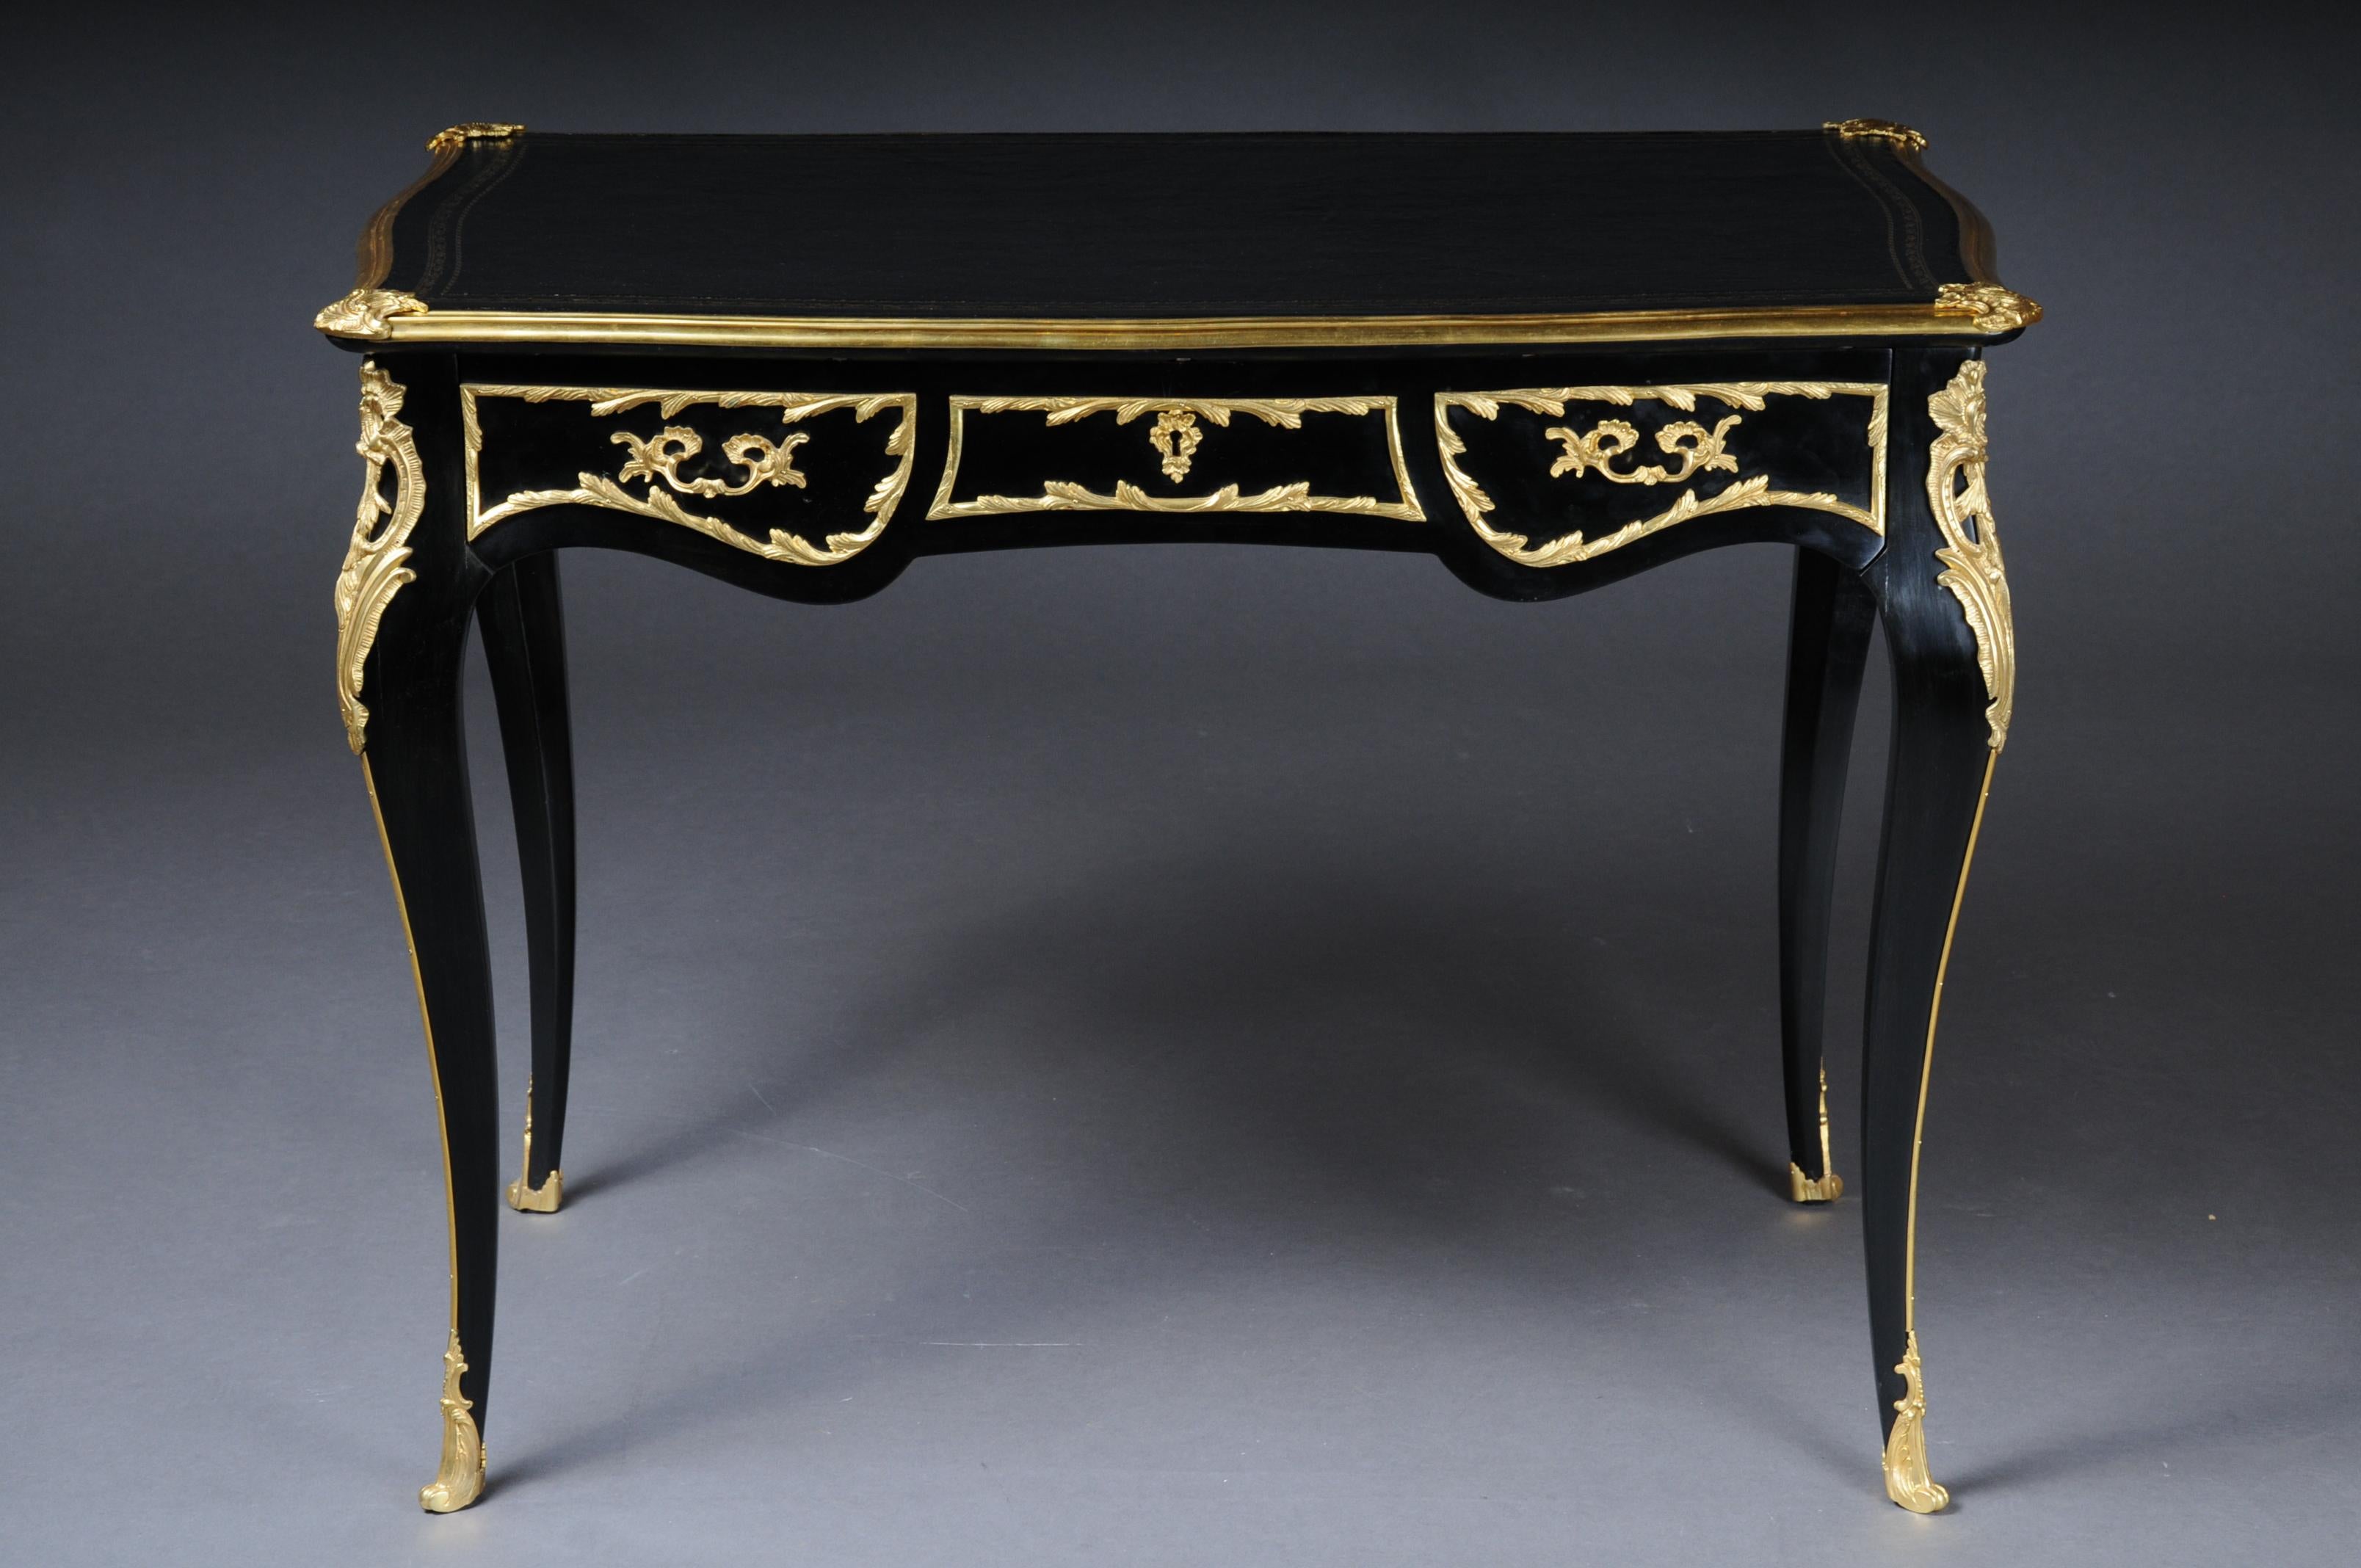 20th century exclusive bureau plat/ writing desk in Louis XV style

Solid beechwood ebonized/blackened. Very fine, floral bronze fittings. Frame base with four-sided curvature. 3 drawers and wide knee compartment ending on elegantly curved square